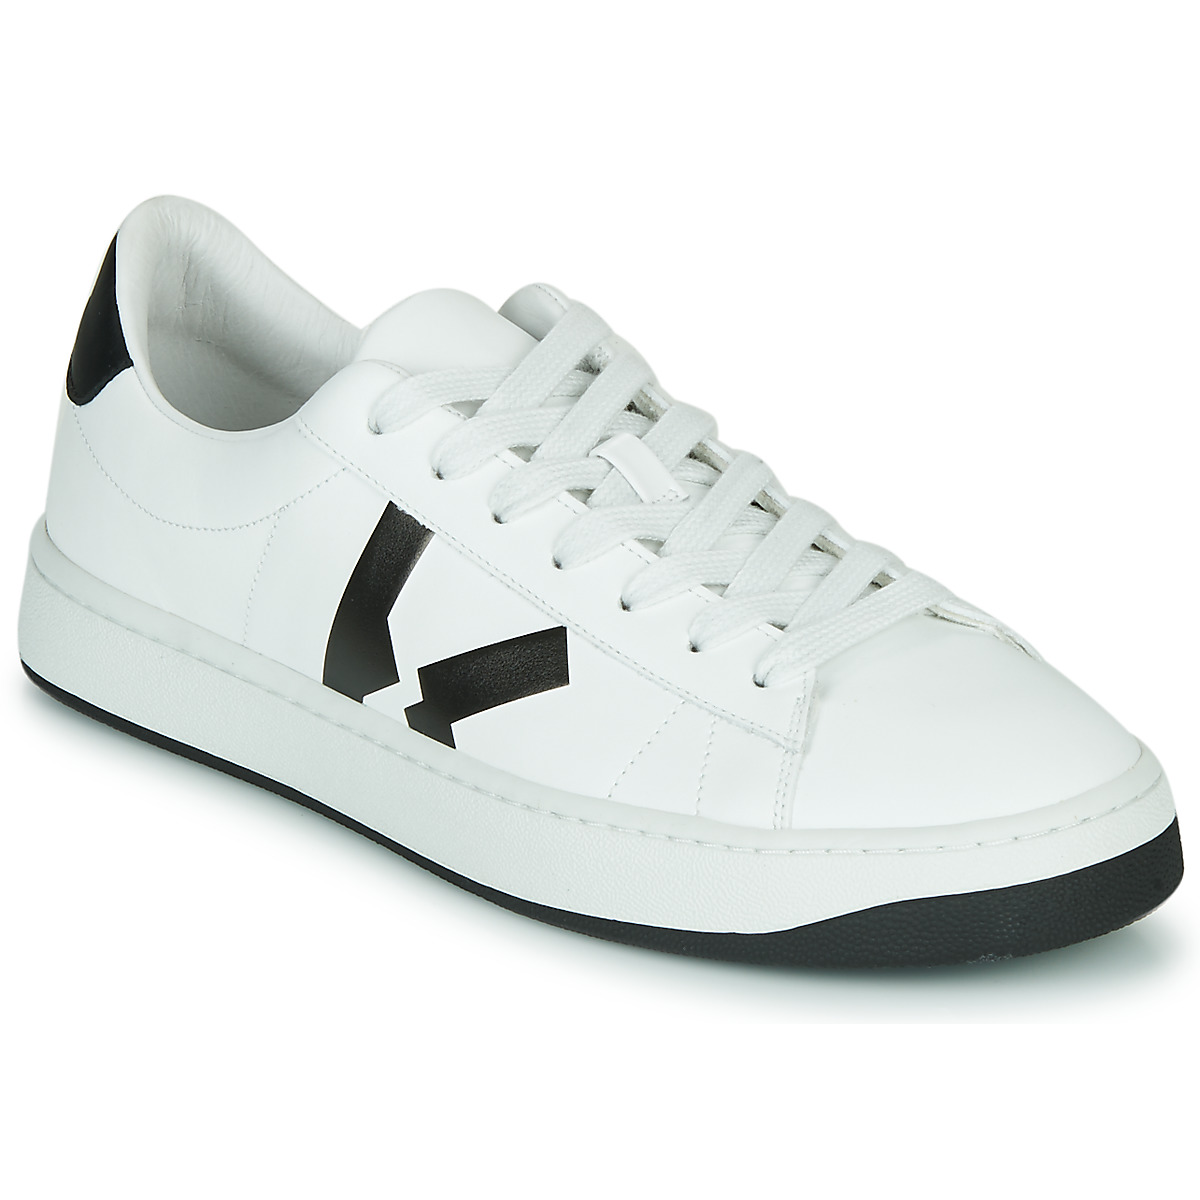 Chaussures Homme Blond Eyebrows and Distressed Dad Shoes KENZO KOURT LACE UP SNEAKERS Blanc